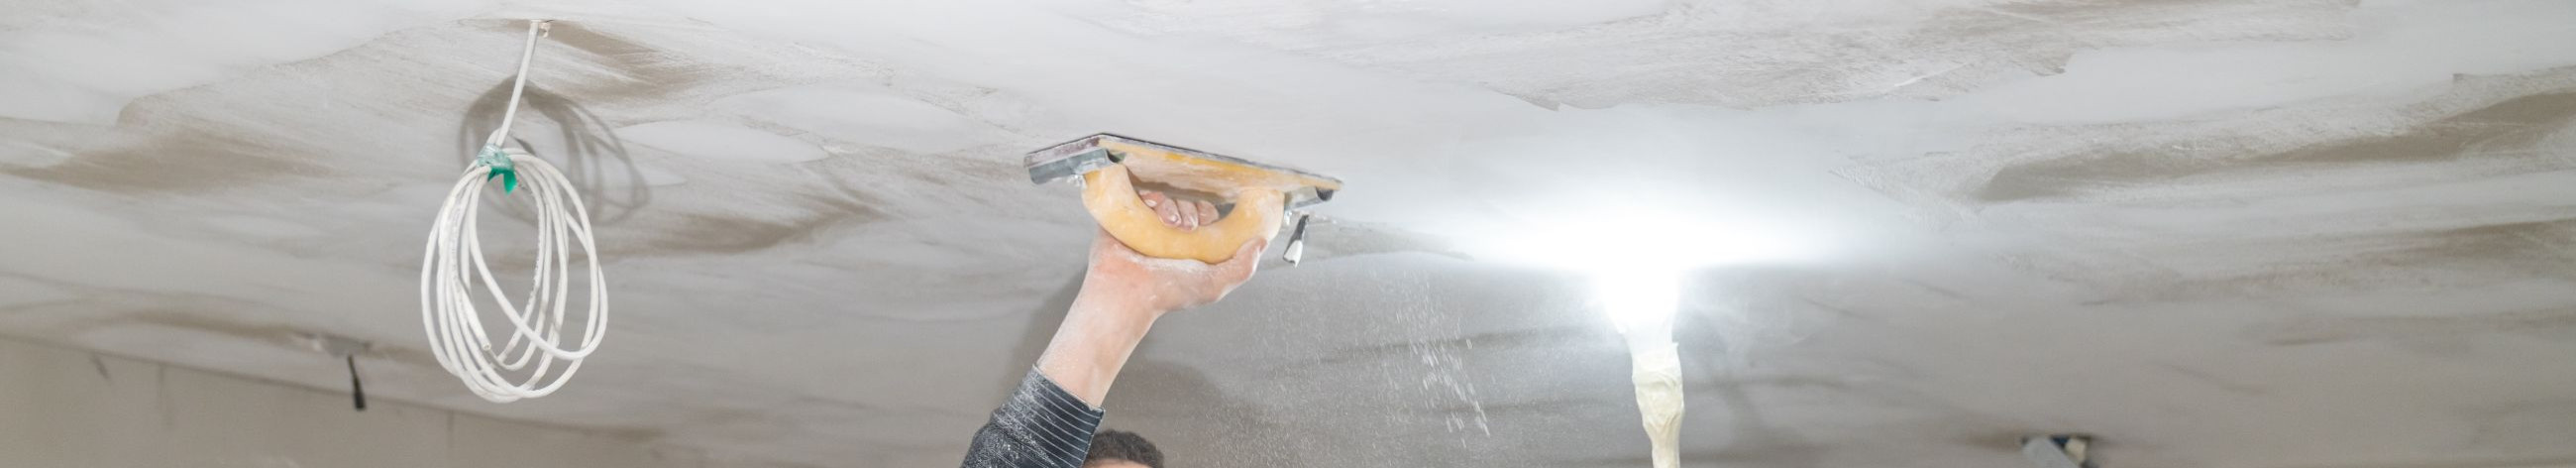 We specialize in gypsum works, microcement installation, painting, and interior finishing.